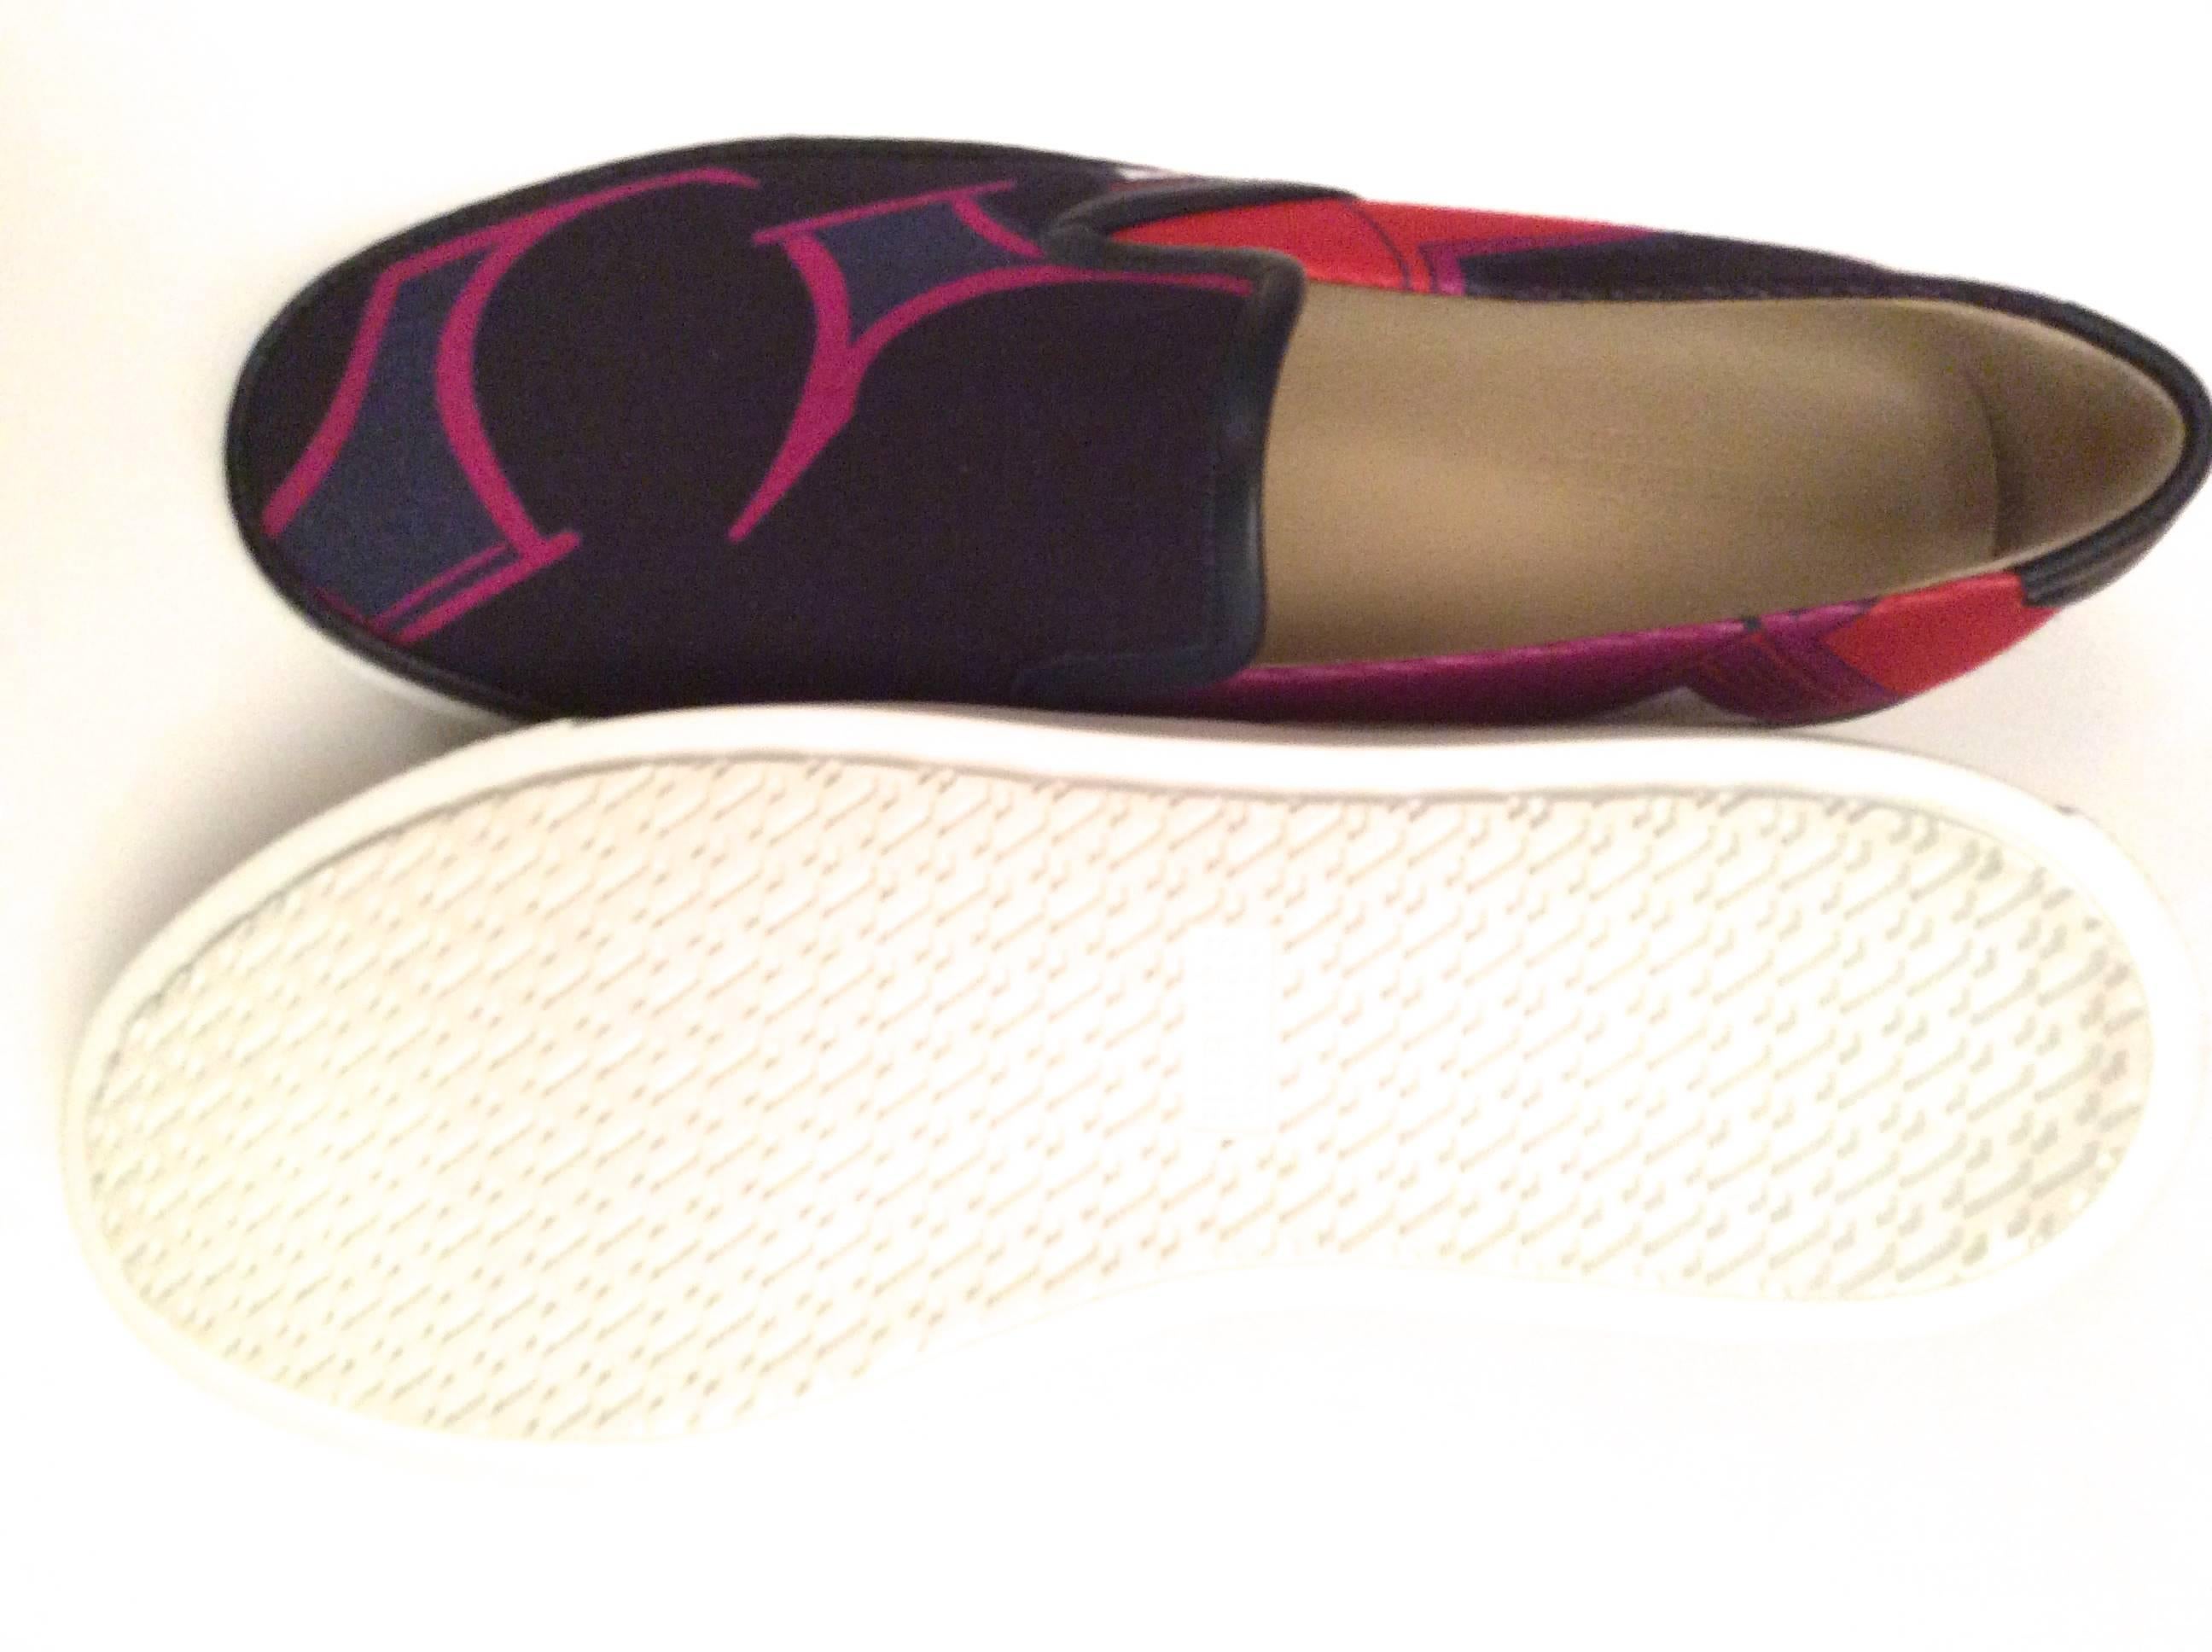 These new women's Hermes sneakers are a size 38. They are cloth, lined in leather, and have rubber bottoms. They have a unique blue, purple, red and pink geometric design. They are a size 38 and run a little big. There is blue leather border around